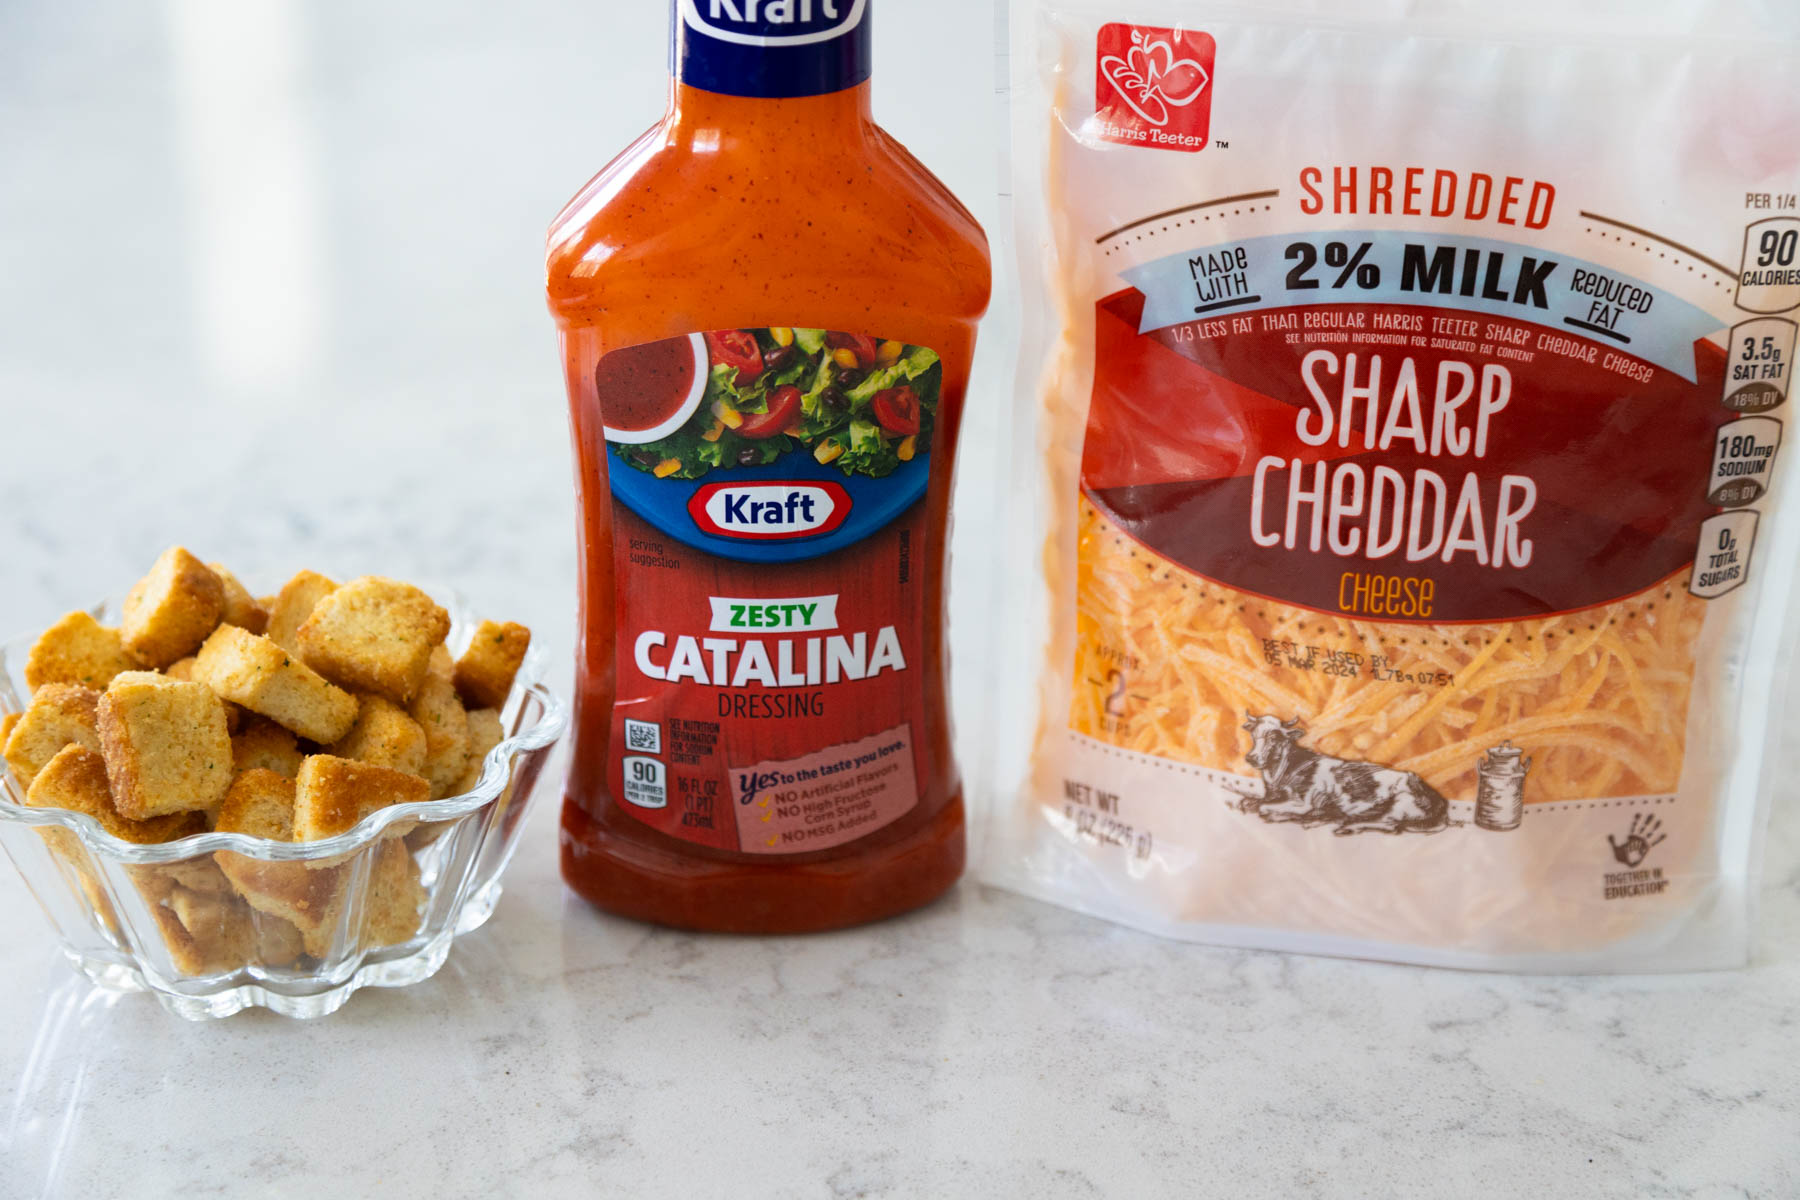 A bottle of Catalina dressing sits next to a bag of shredded cheddar cheese and a bowl of croutons.